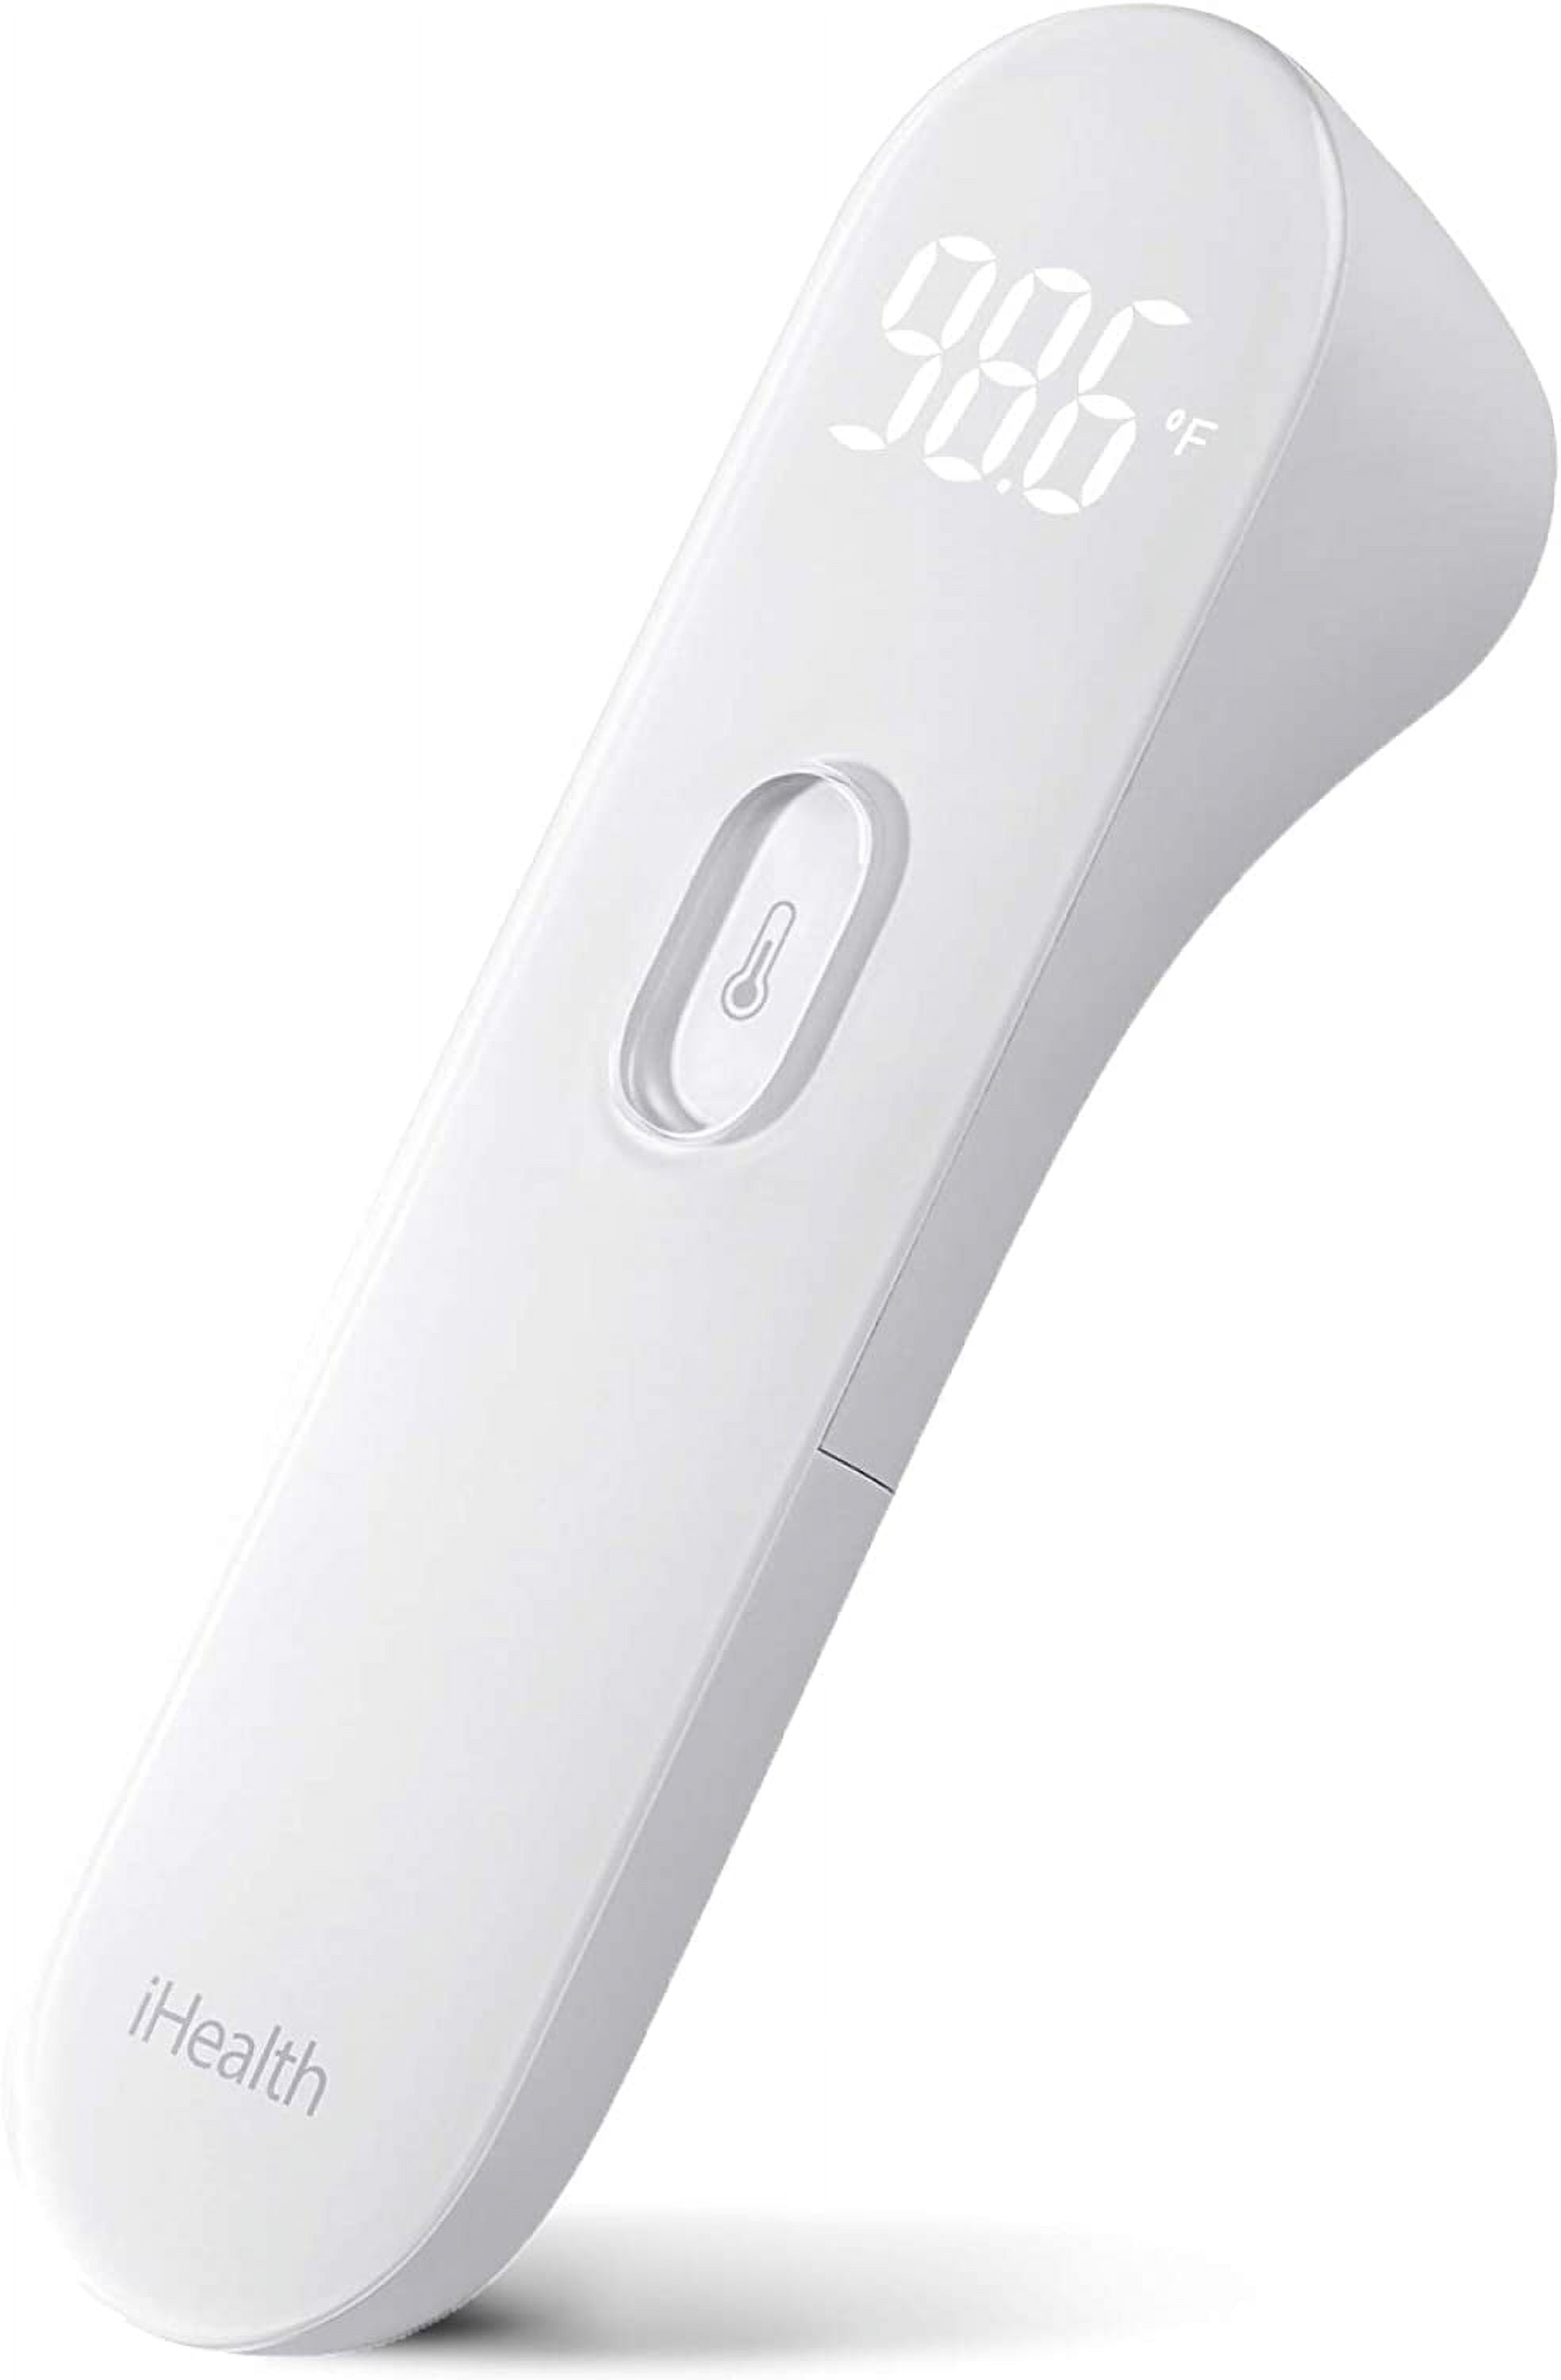 iHealth Smart Bluetooth Thermometer for Adults and Kids - Wireless No-Touch  Digital Thermometer for Forehead - 3 Ultra-Sensitive Sensors, Large LED